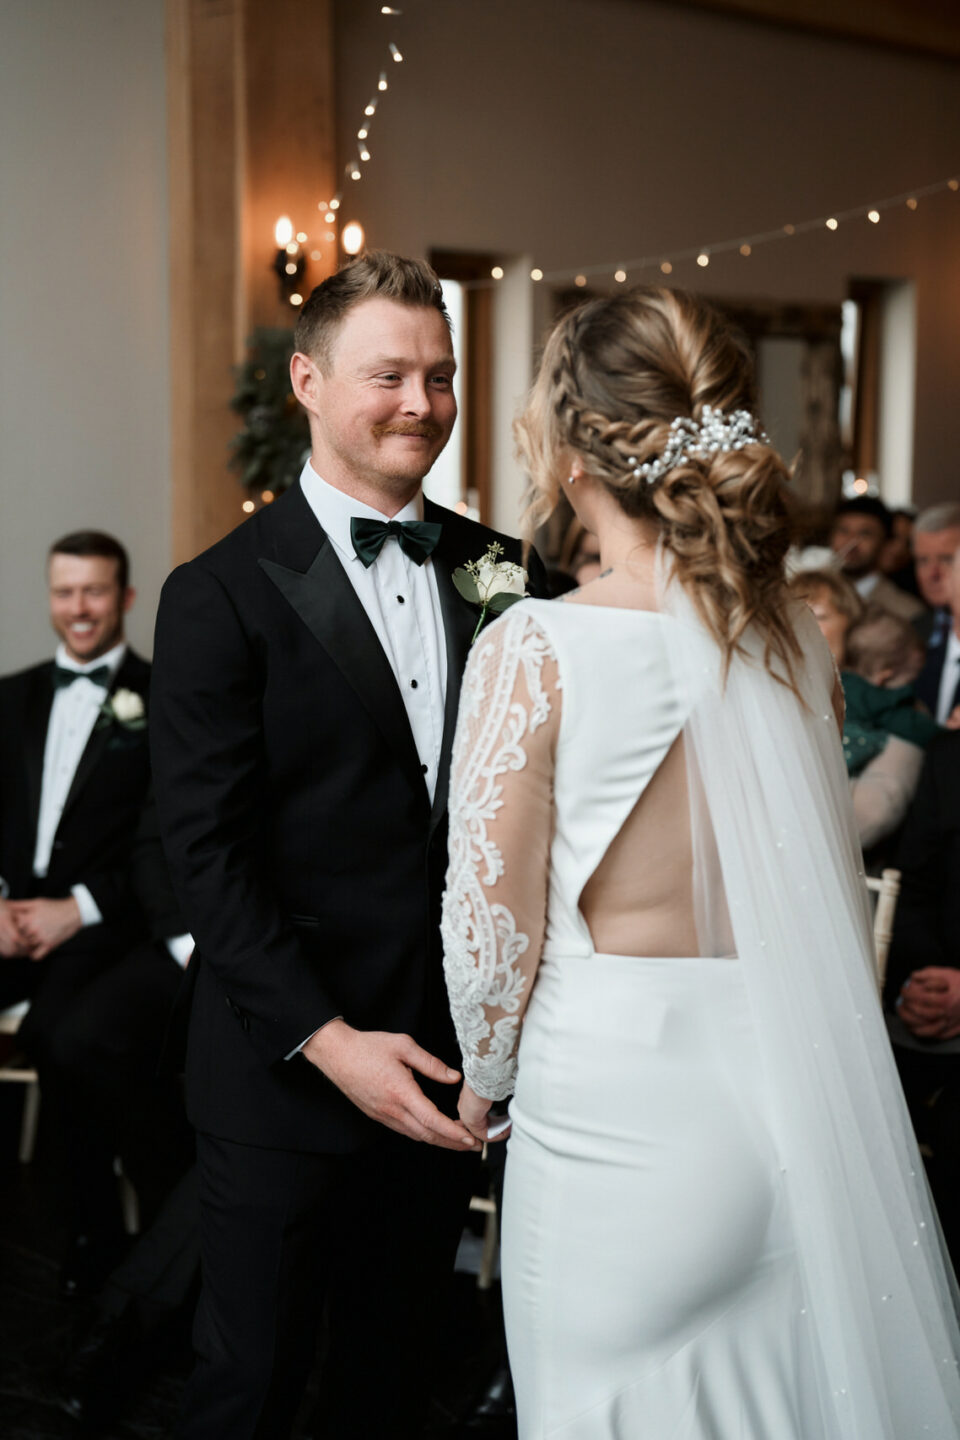 A man and woman grinning at each other while getting married.